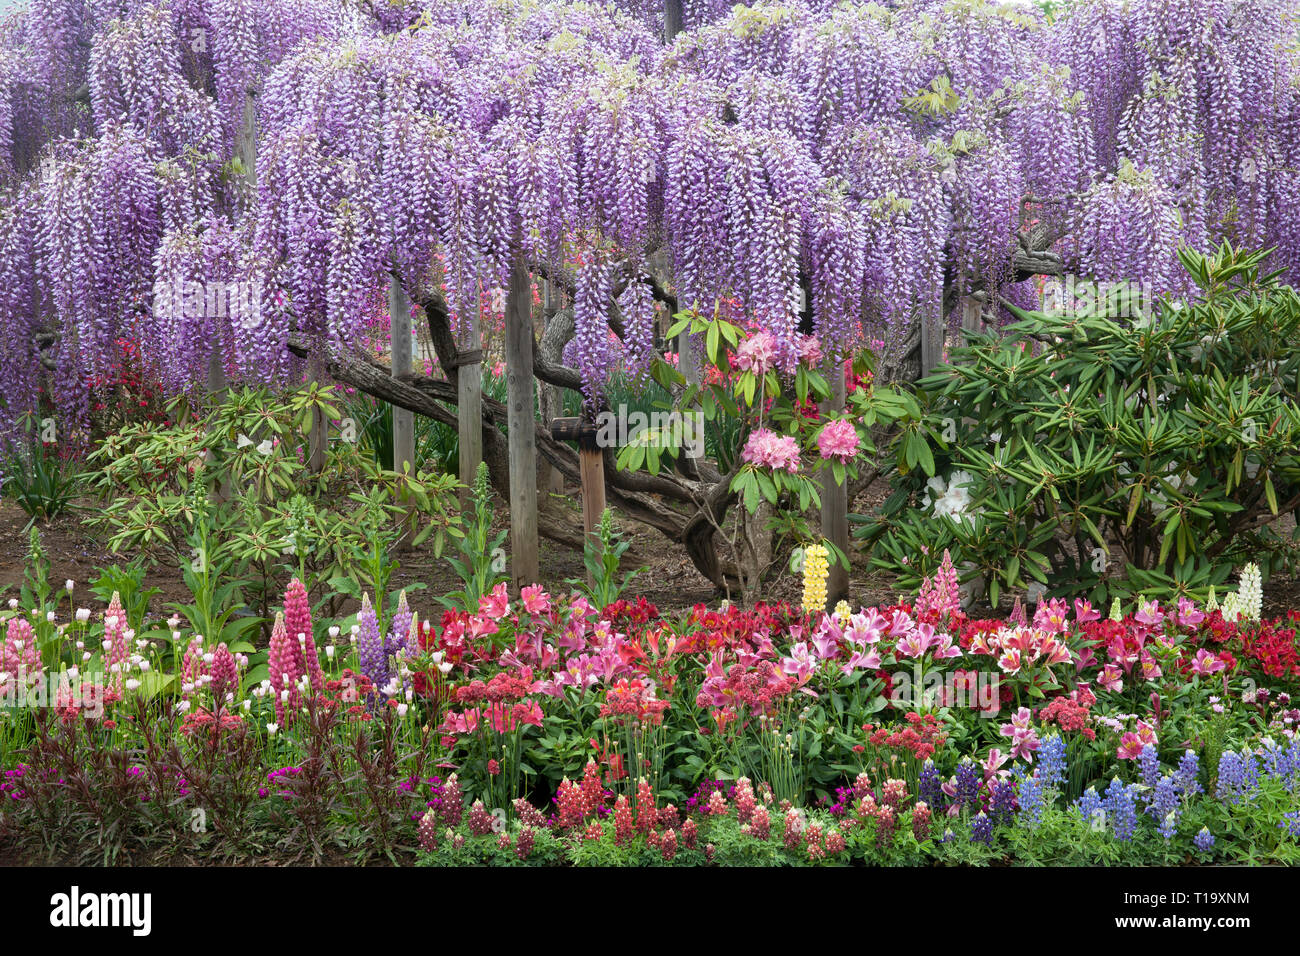 Wisteria and other flowers in full bloom in late spring at Ashikaga Flower Park, Ashikaga, Japan Stock Photo